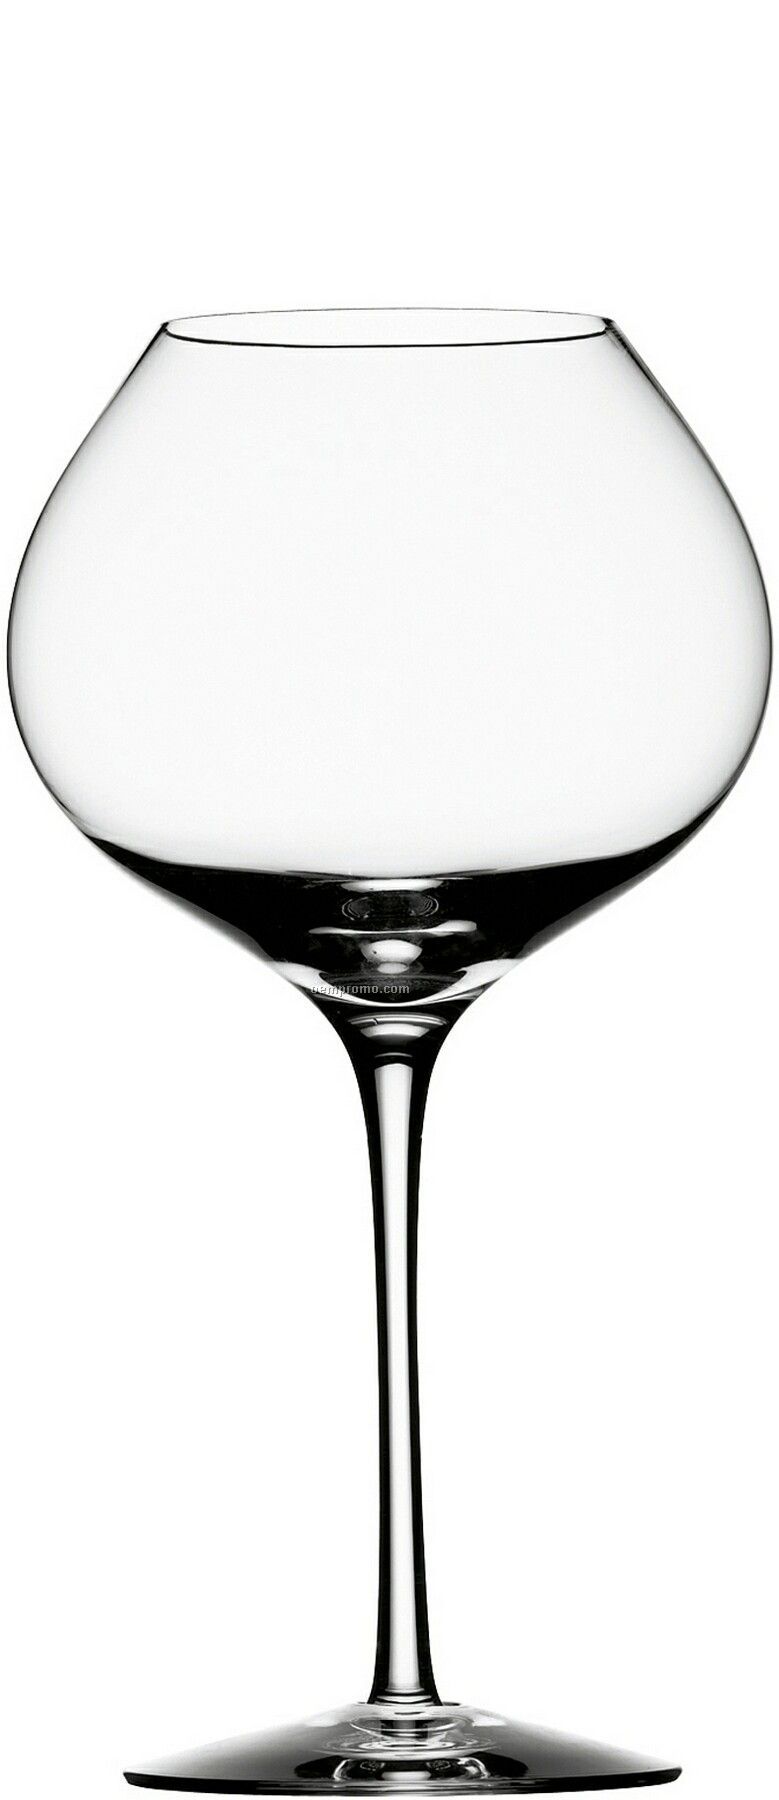 Difference "Mature" Crystal Wine Glass W/ Flavor Enhance Design